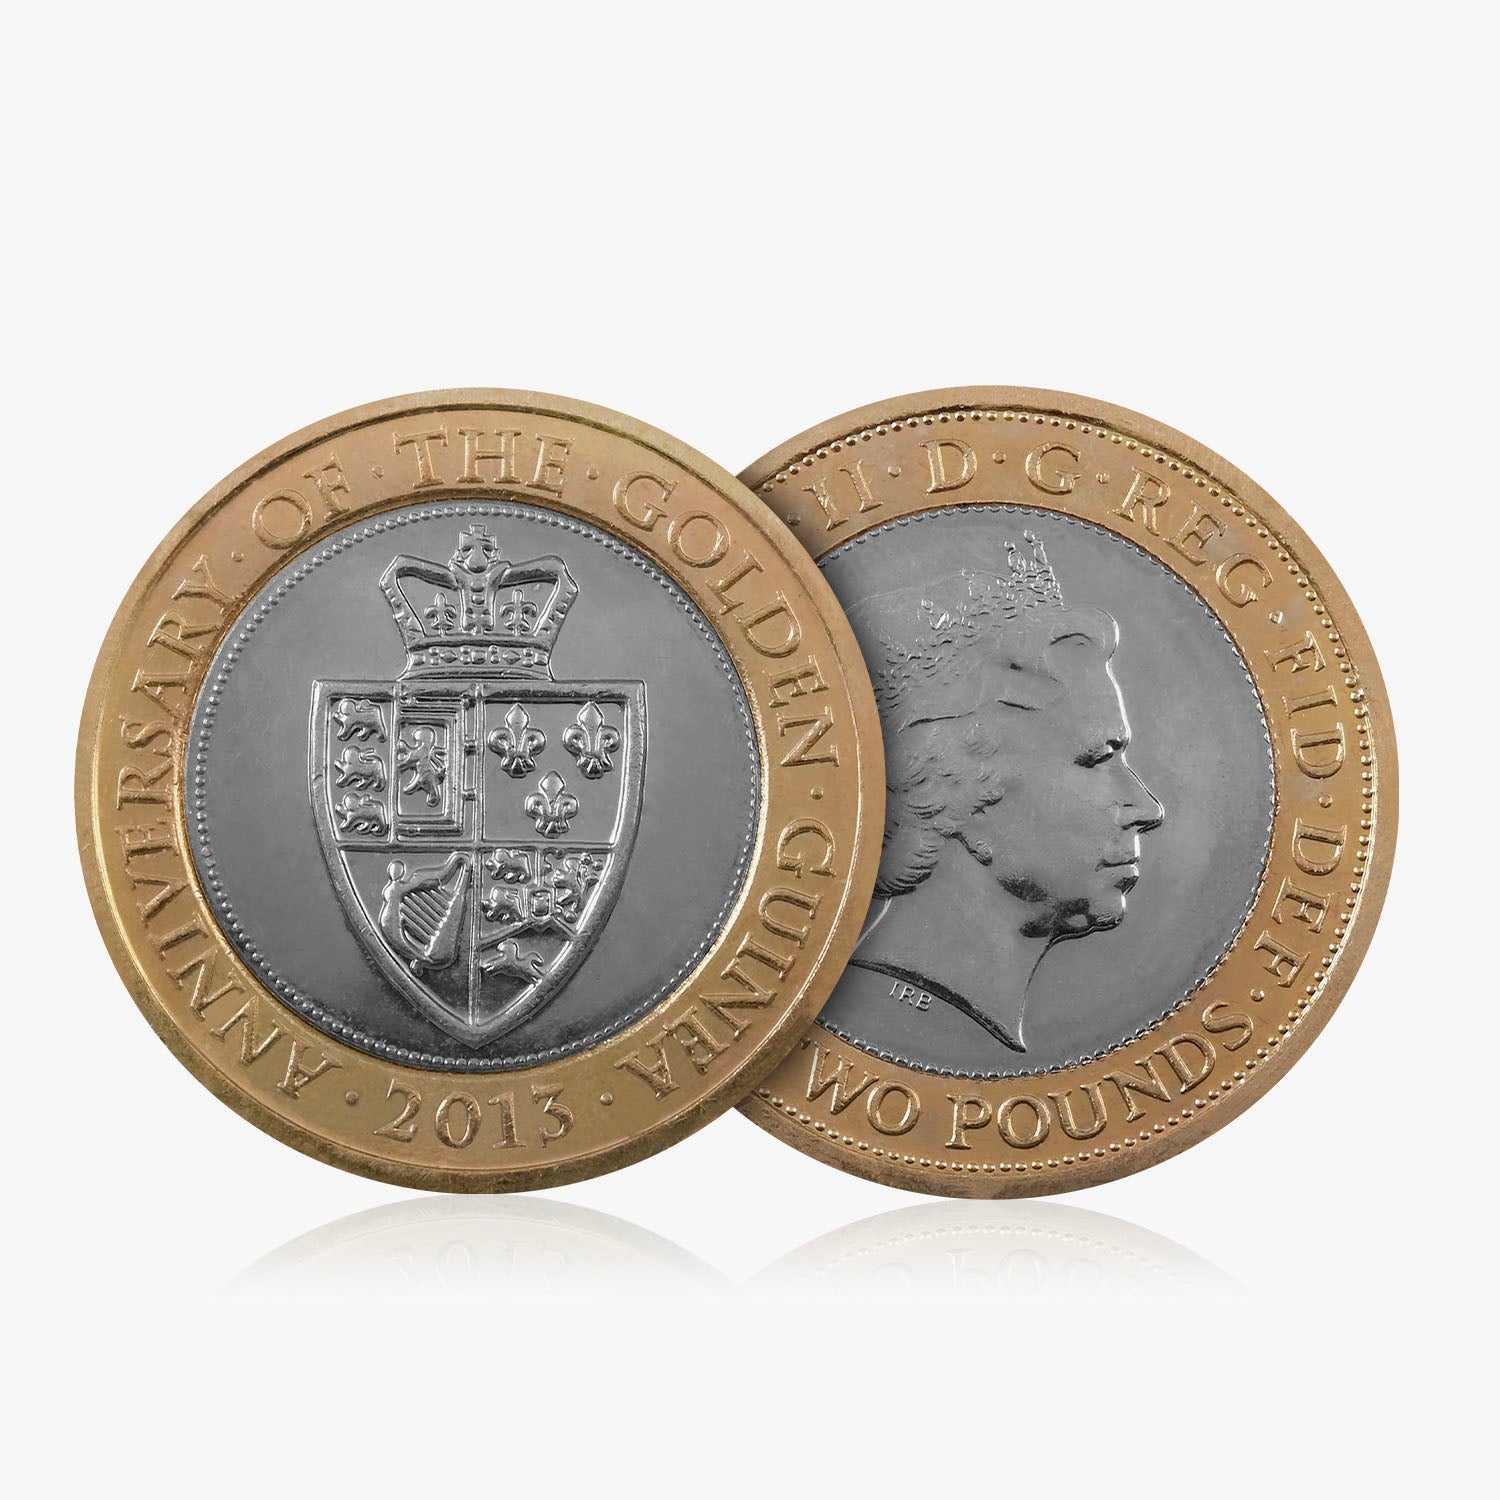 2013 Circulated Anniversary of the Golden Guinea UK £2 Coin